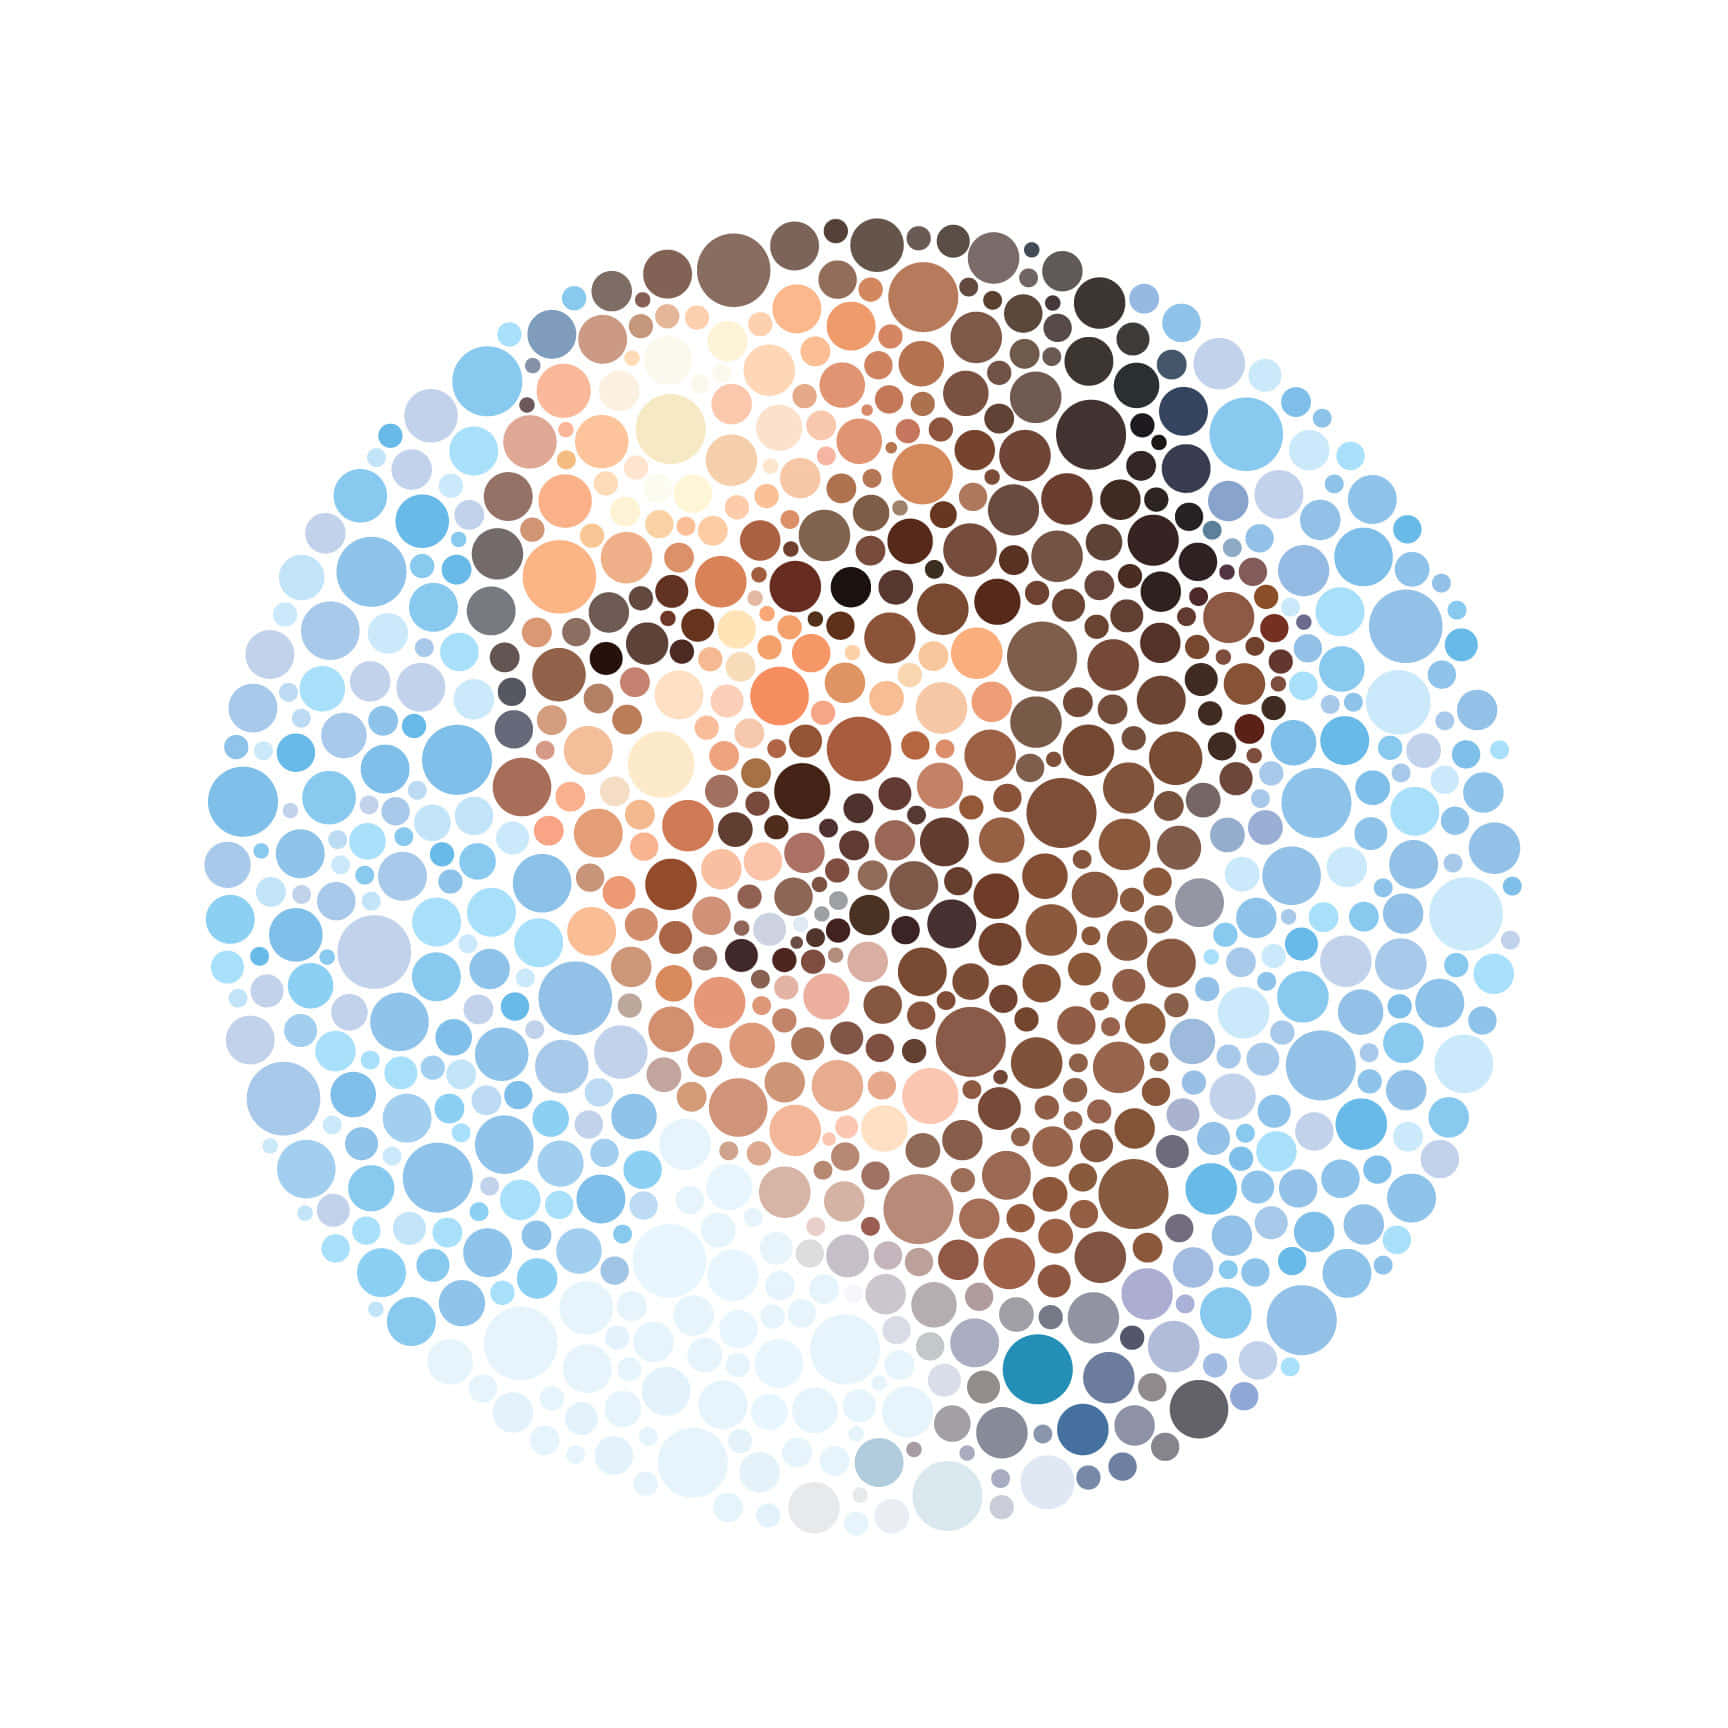 Obama's Face Is Shown In A Circle Of Dots